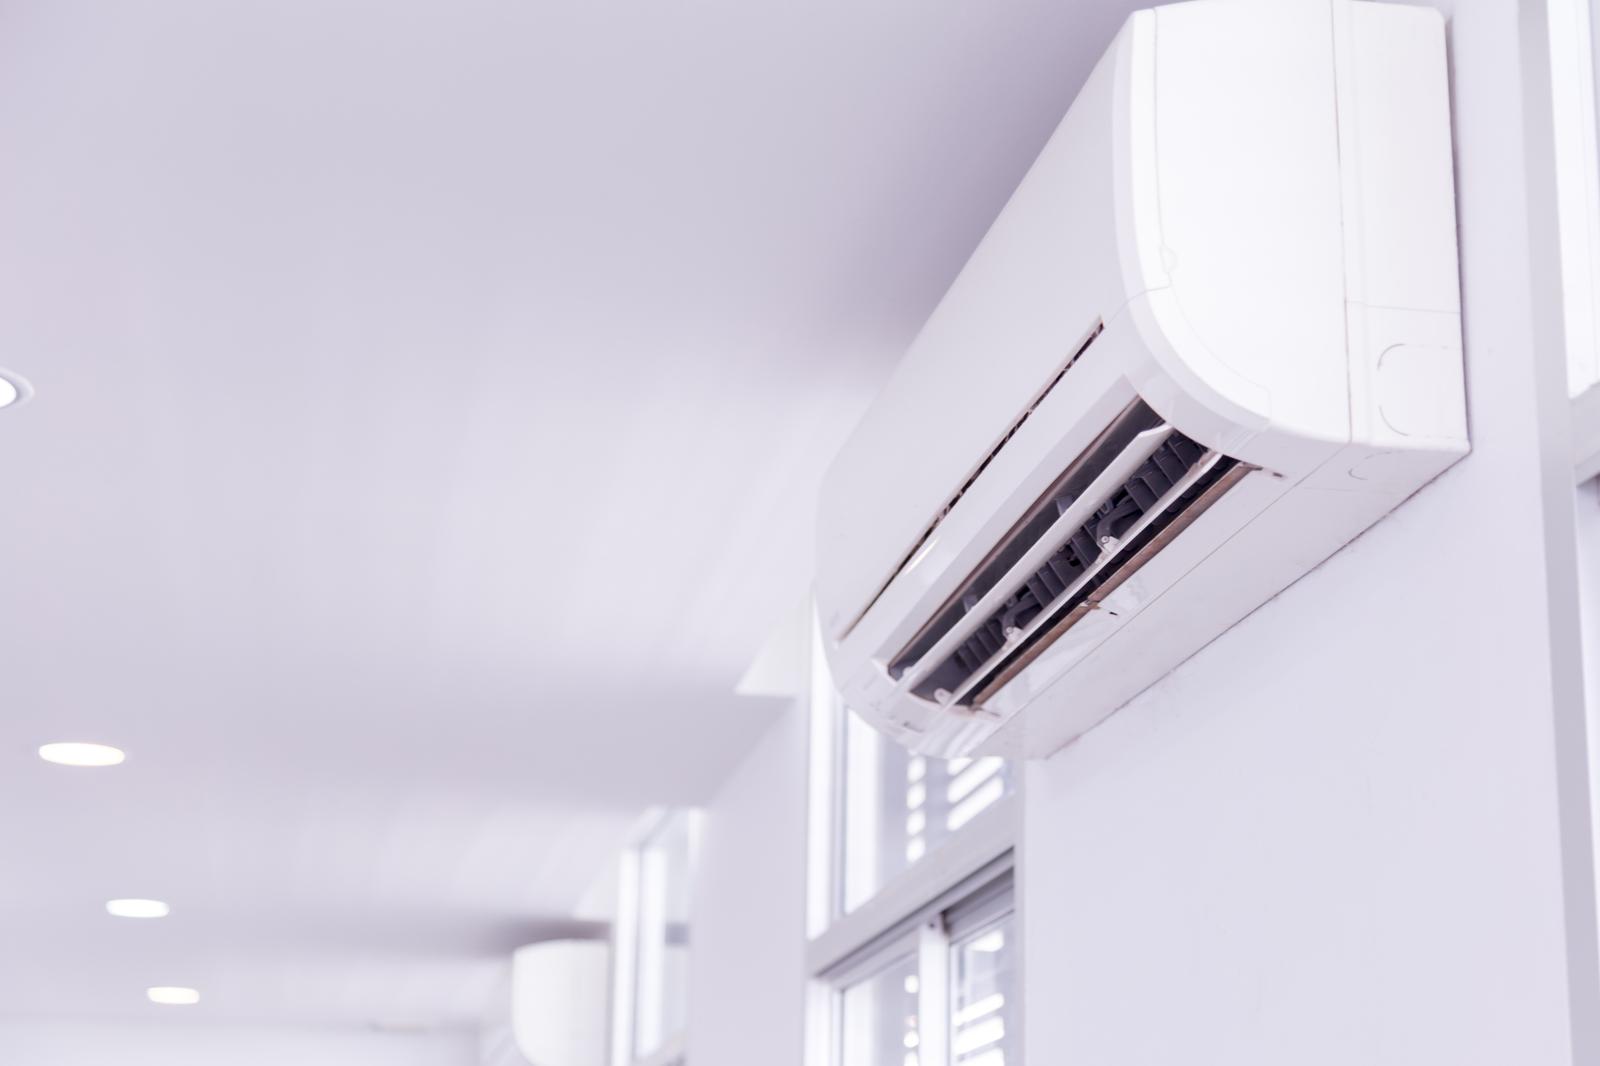 Installation of heating, ventilation and air conditioning equipment in Tallinn